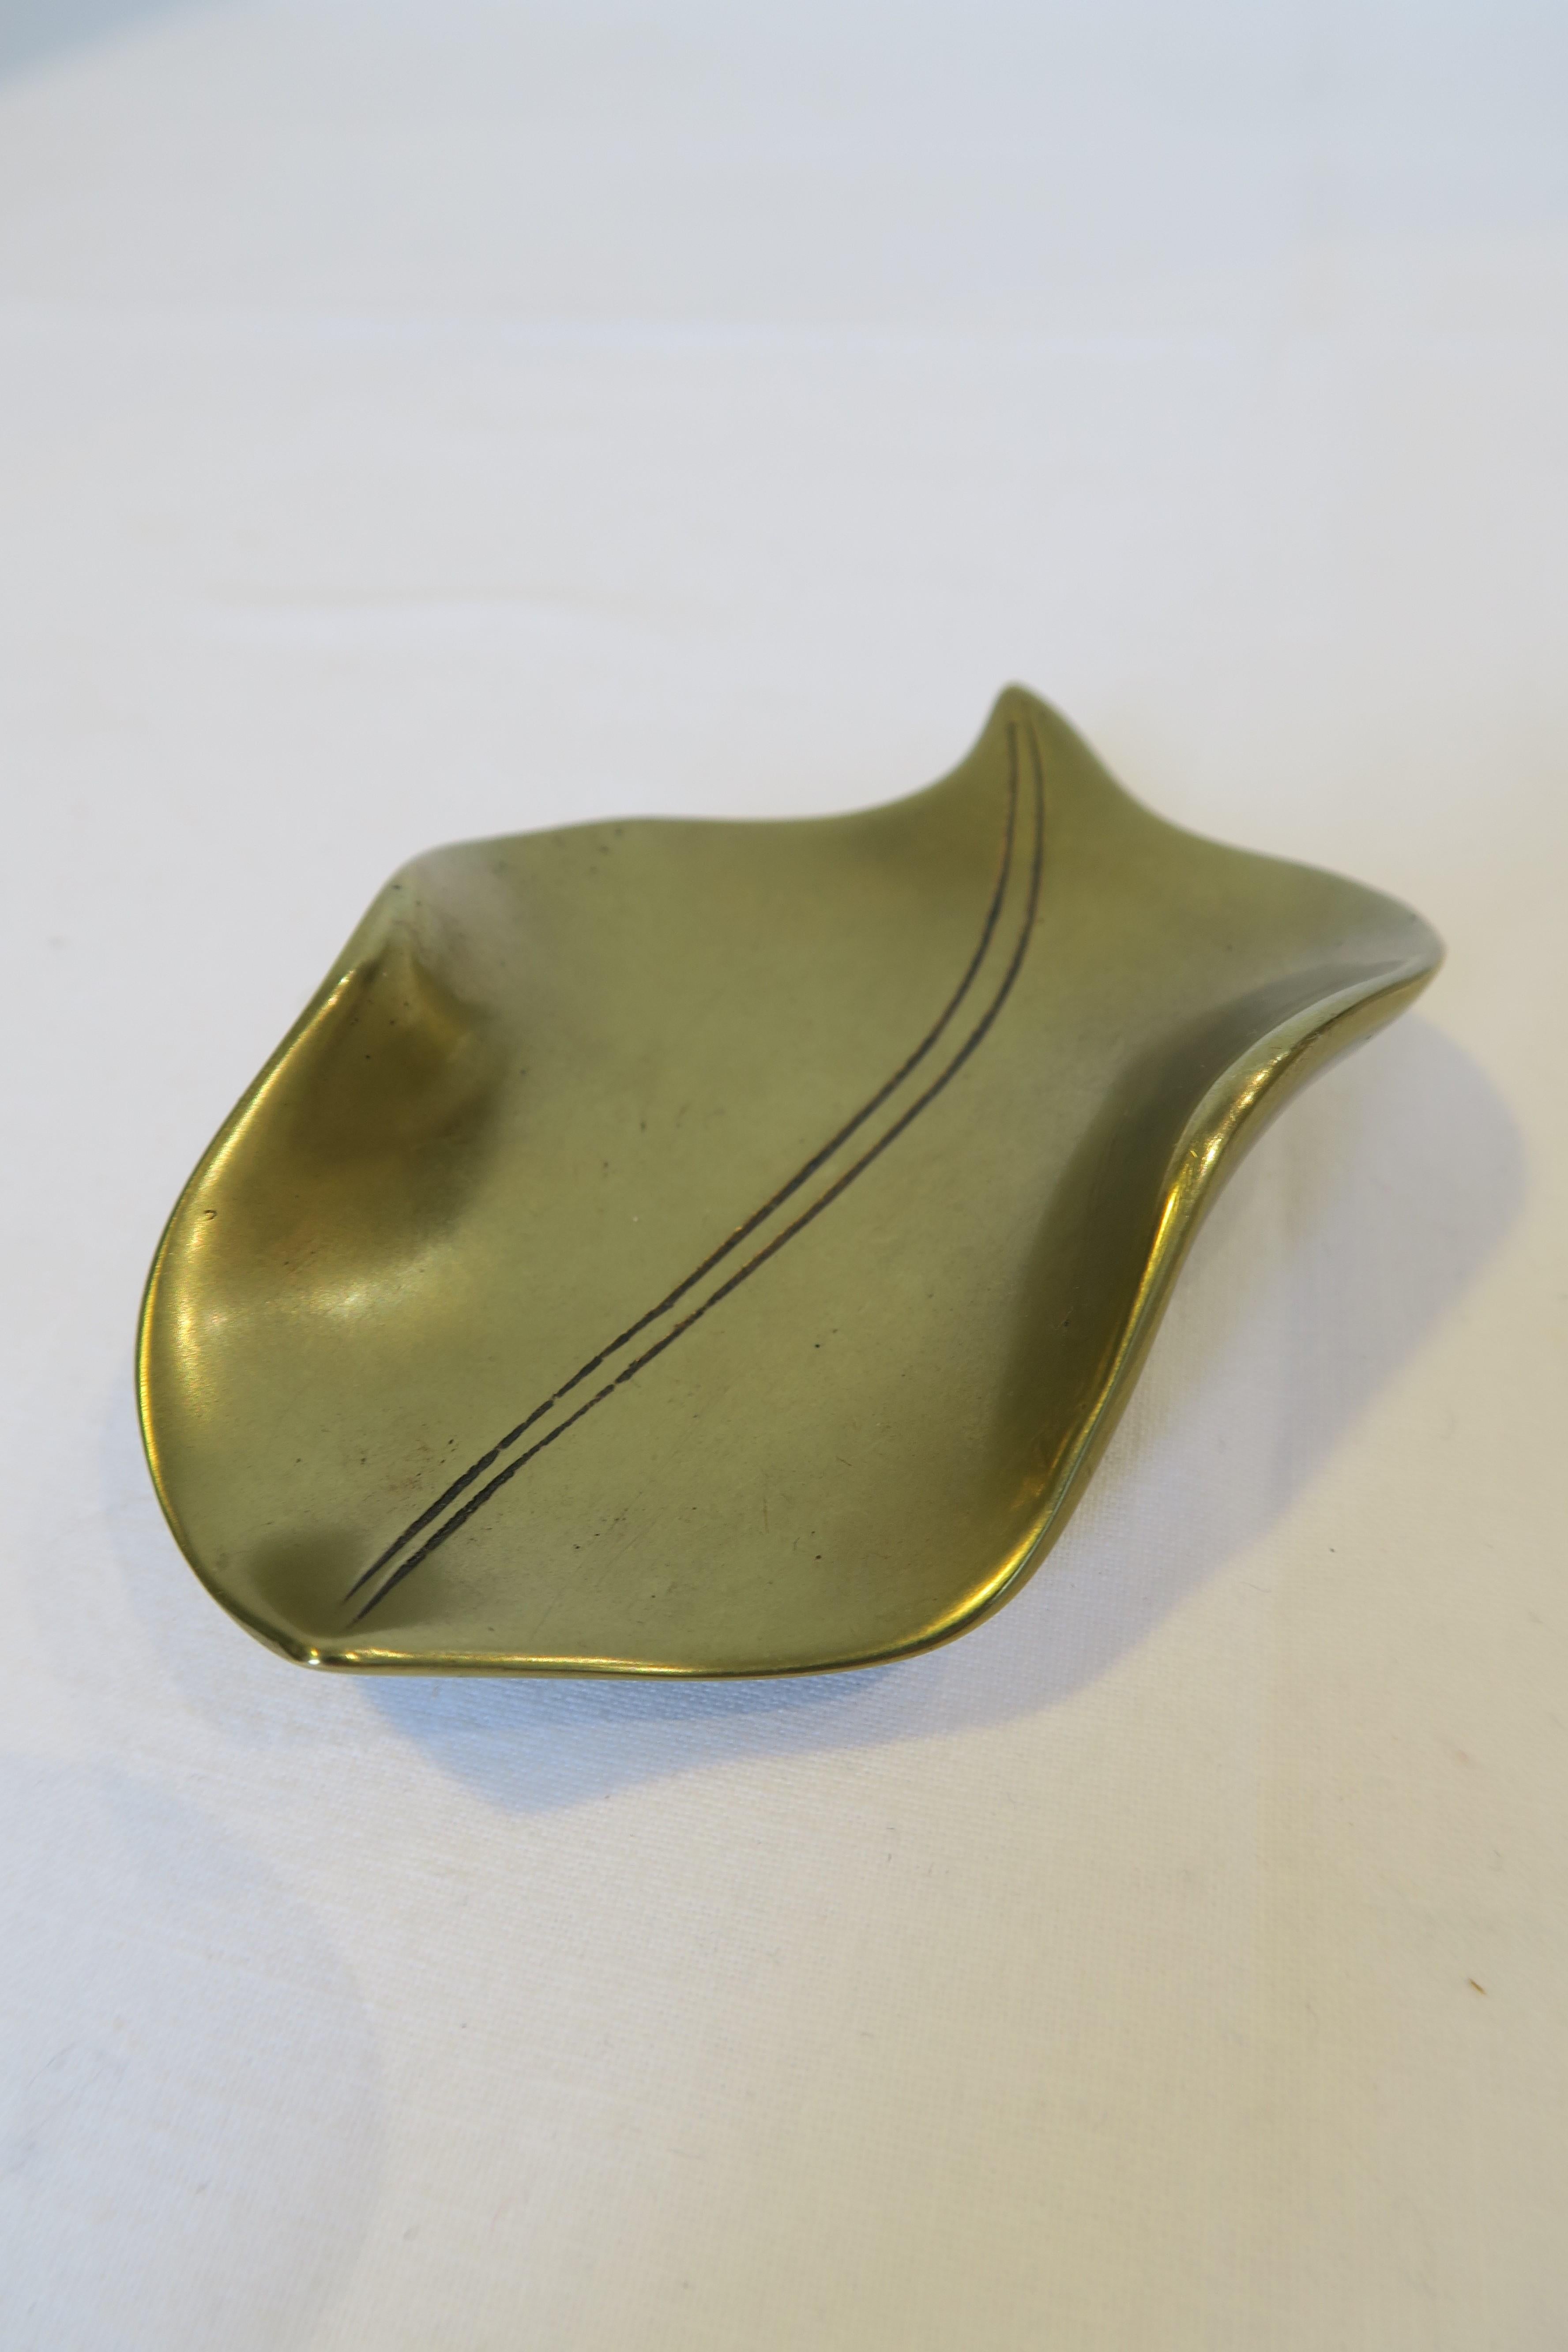 For sale is a beautiful decorative dish in the shape of a leaf. It was hand-crafted from brass and designed by the renowned workshops of Carl Auböck in Austria. It is a perfect example of the typical form-follows-function-style of the 50s and German